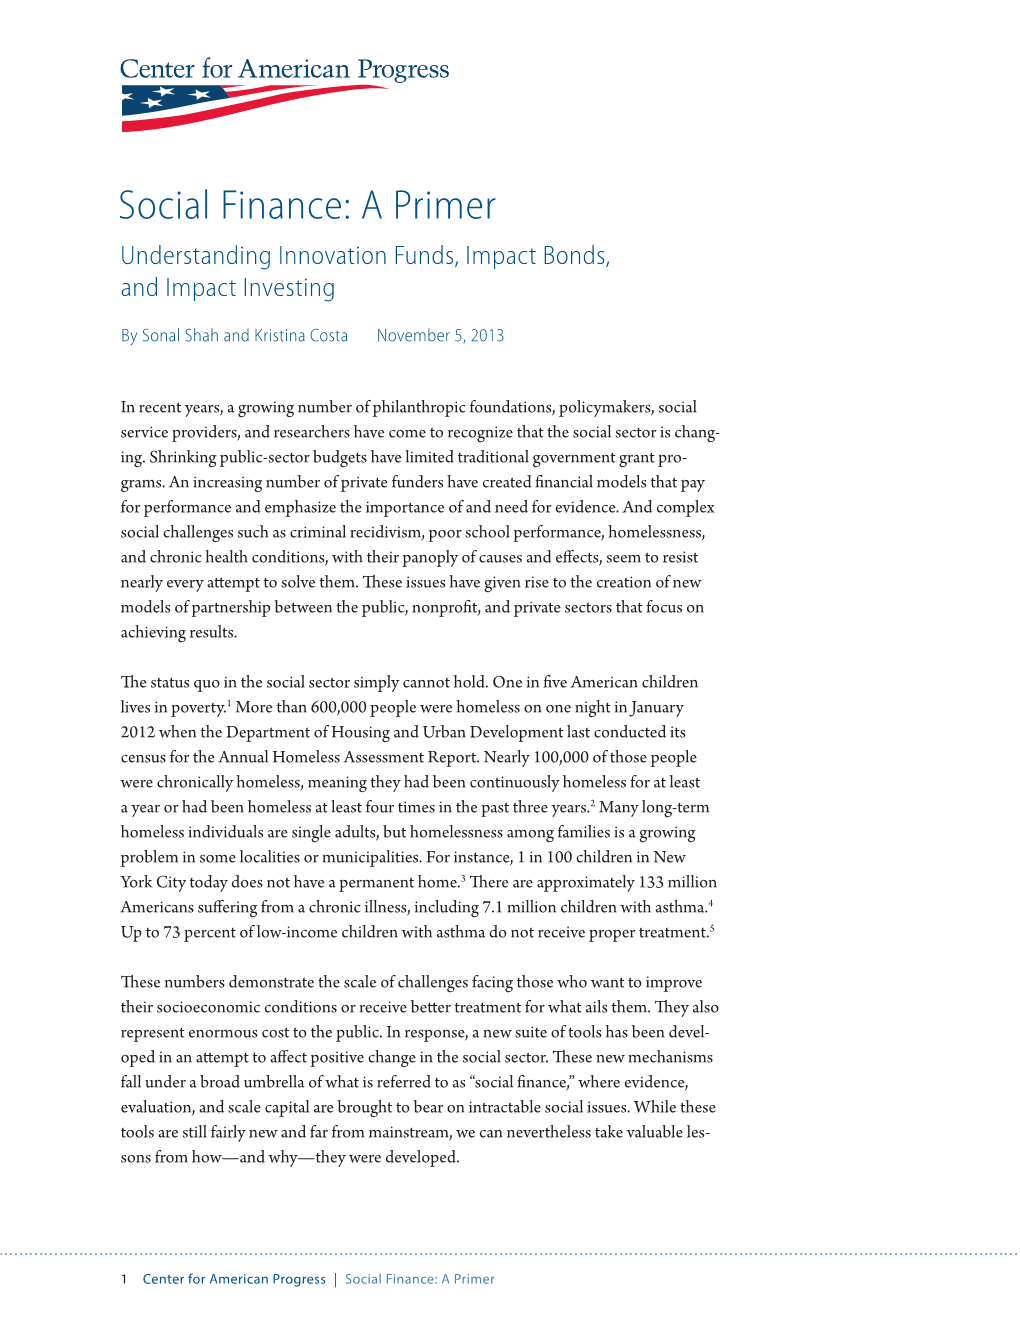 Social Finance: a Primer Understanding Innovation Funds, Impact Bonds, and Impact Investing